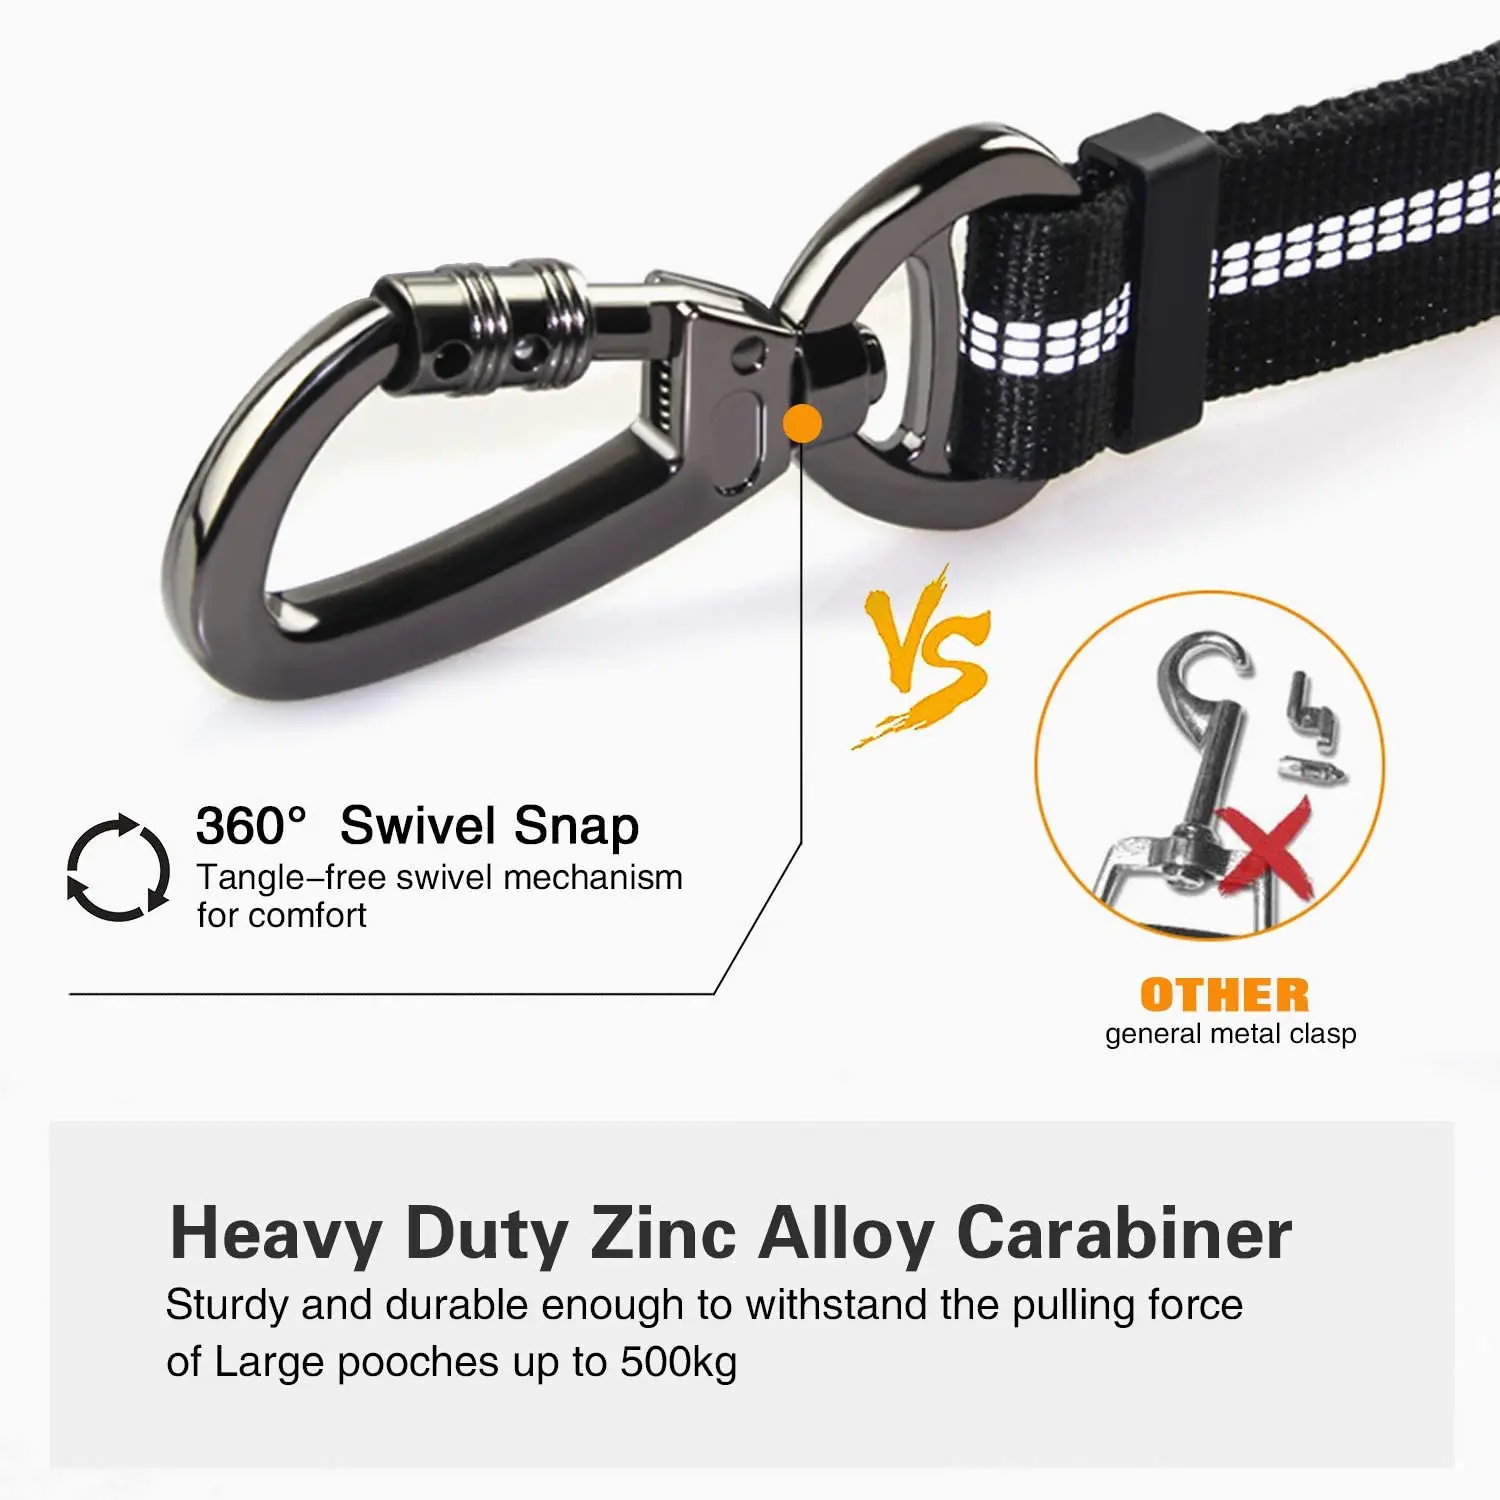 Elastic Nylon Safety Belt Adjustable from 28 to 33 Heavy Duty Dog Seat Belt Especially for Large Dogs Tangle-Free Swivel Attachment Carabiner and Latch Bar Attachment 